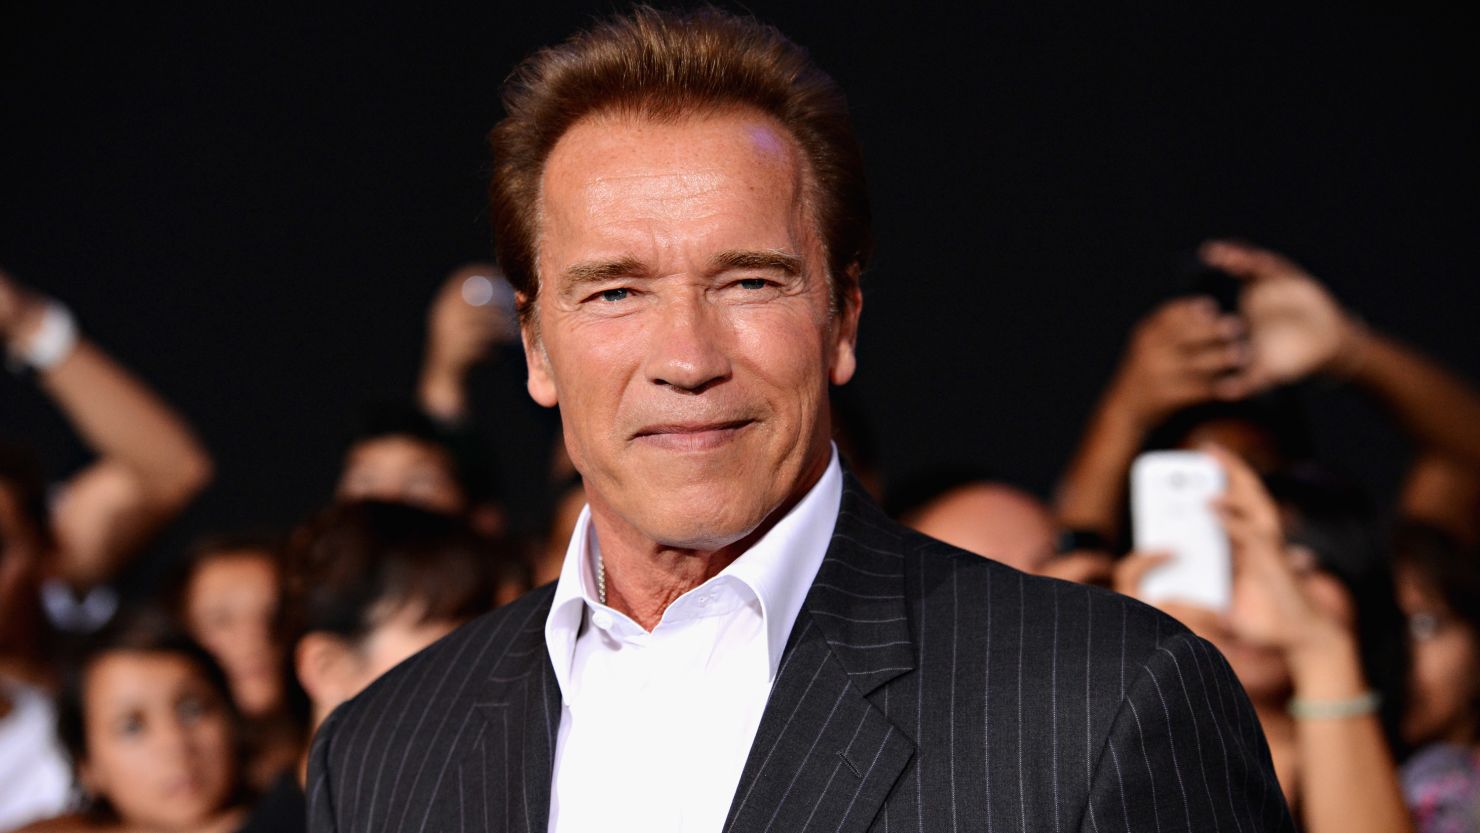 Arnold Schwarzenegger arrives at "The Expendables 2" premiere in August 2012.